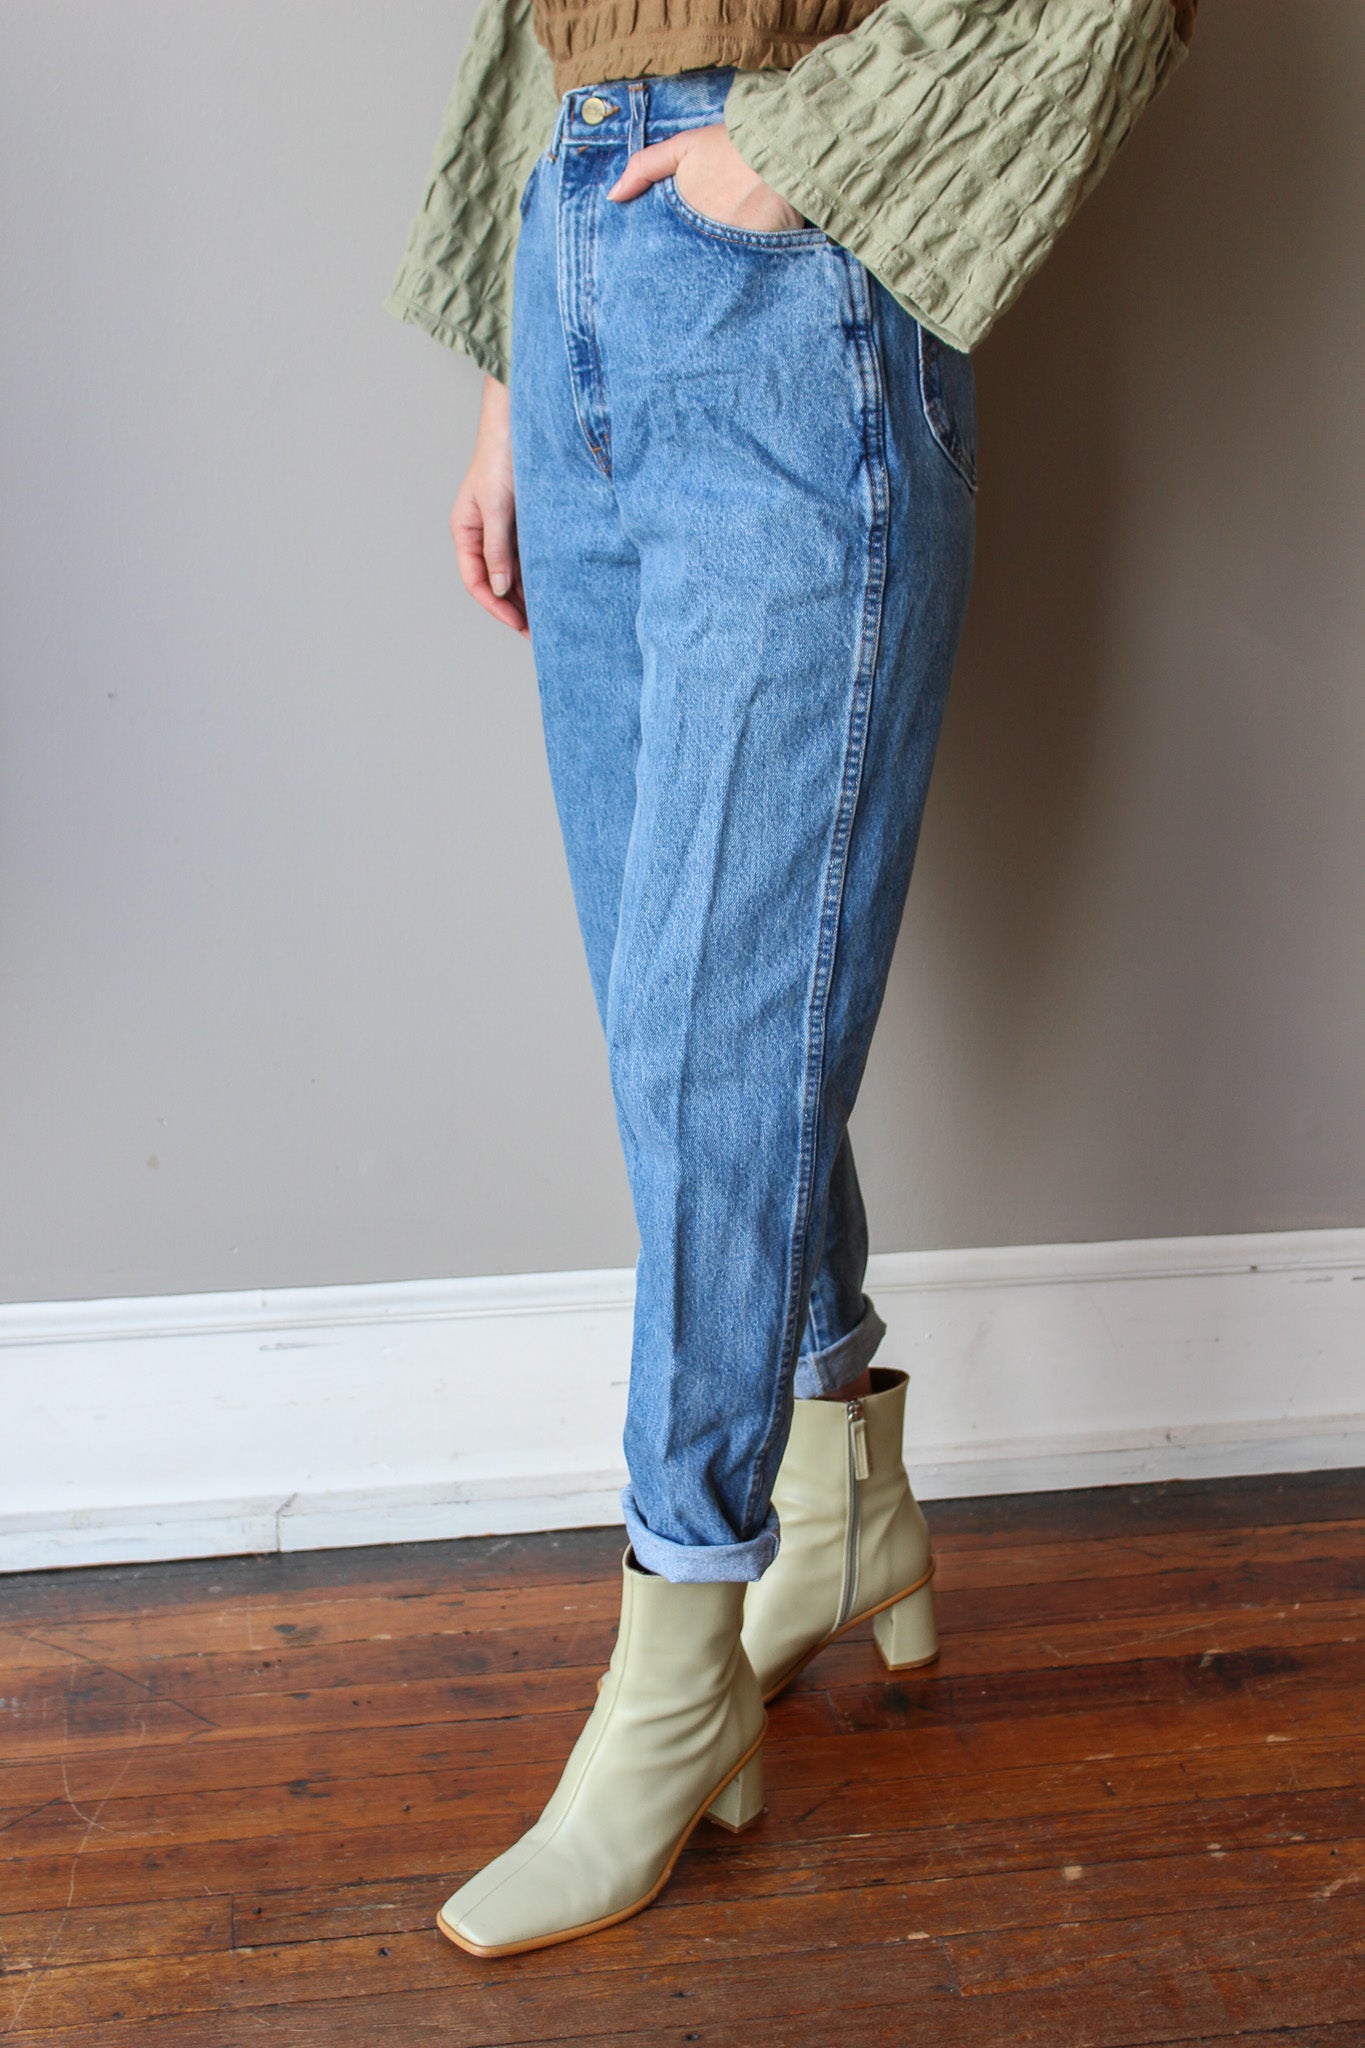 Chic Vintage High Waisted Mom Jeans (Size 12) – The Thrifty Hippy